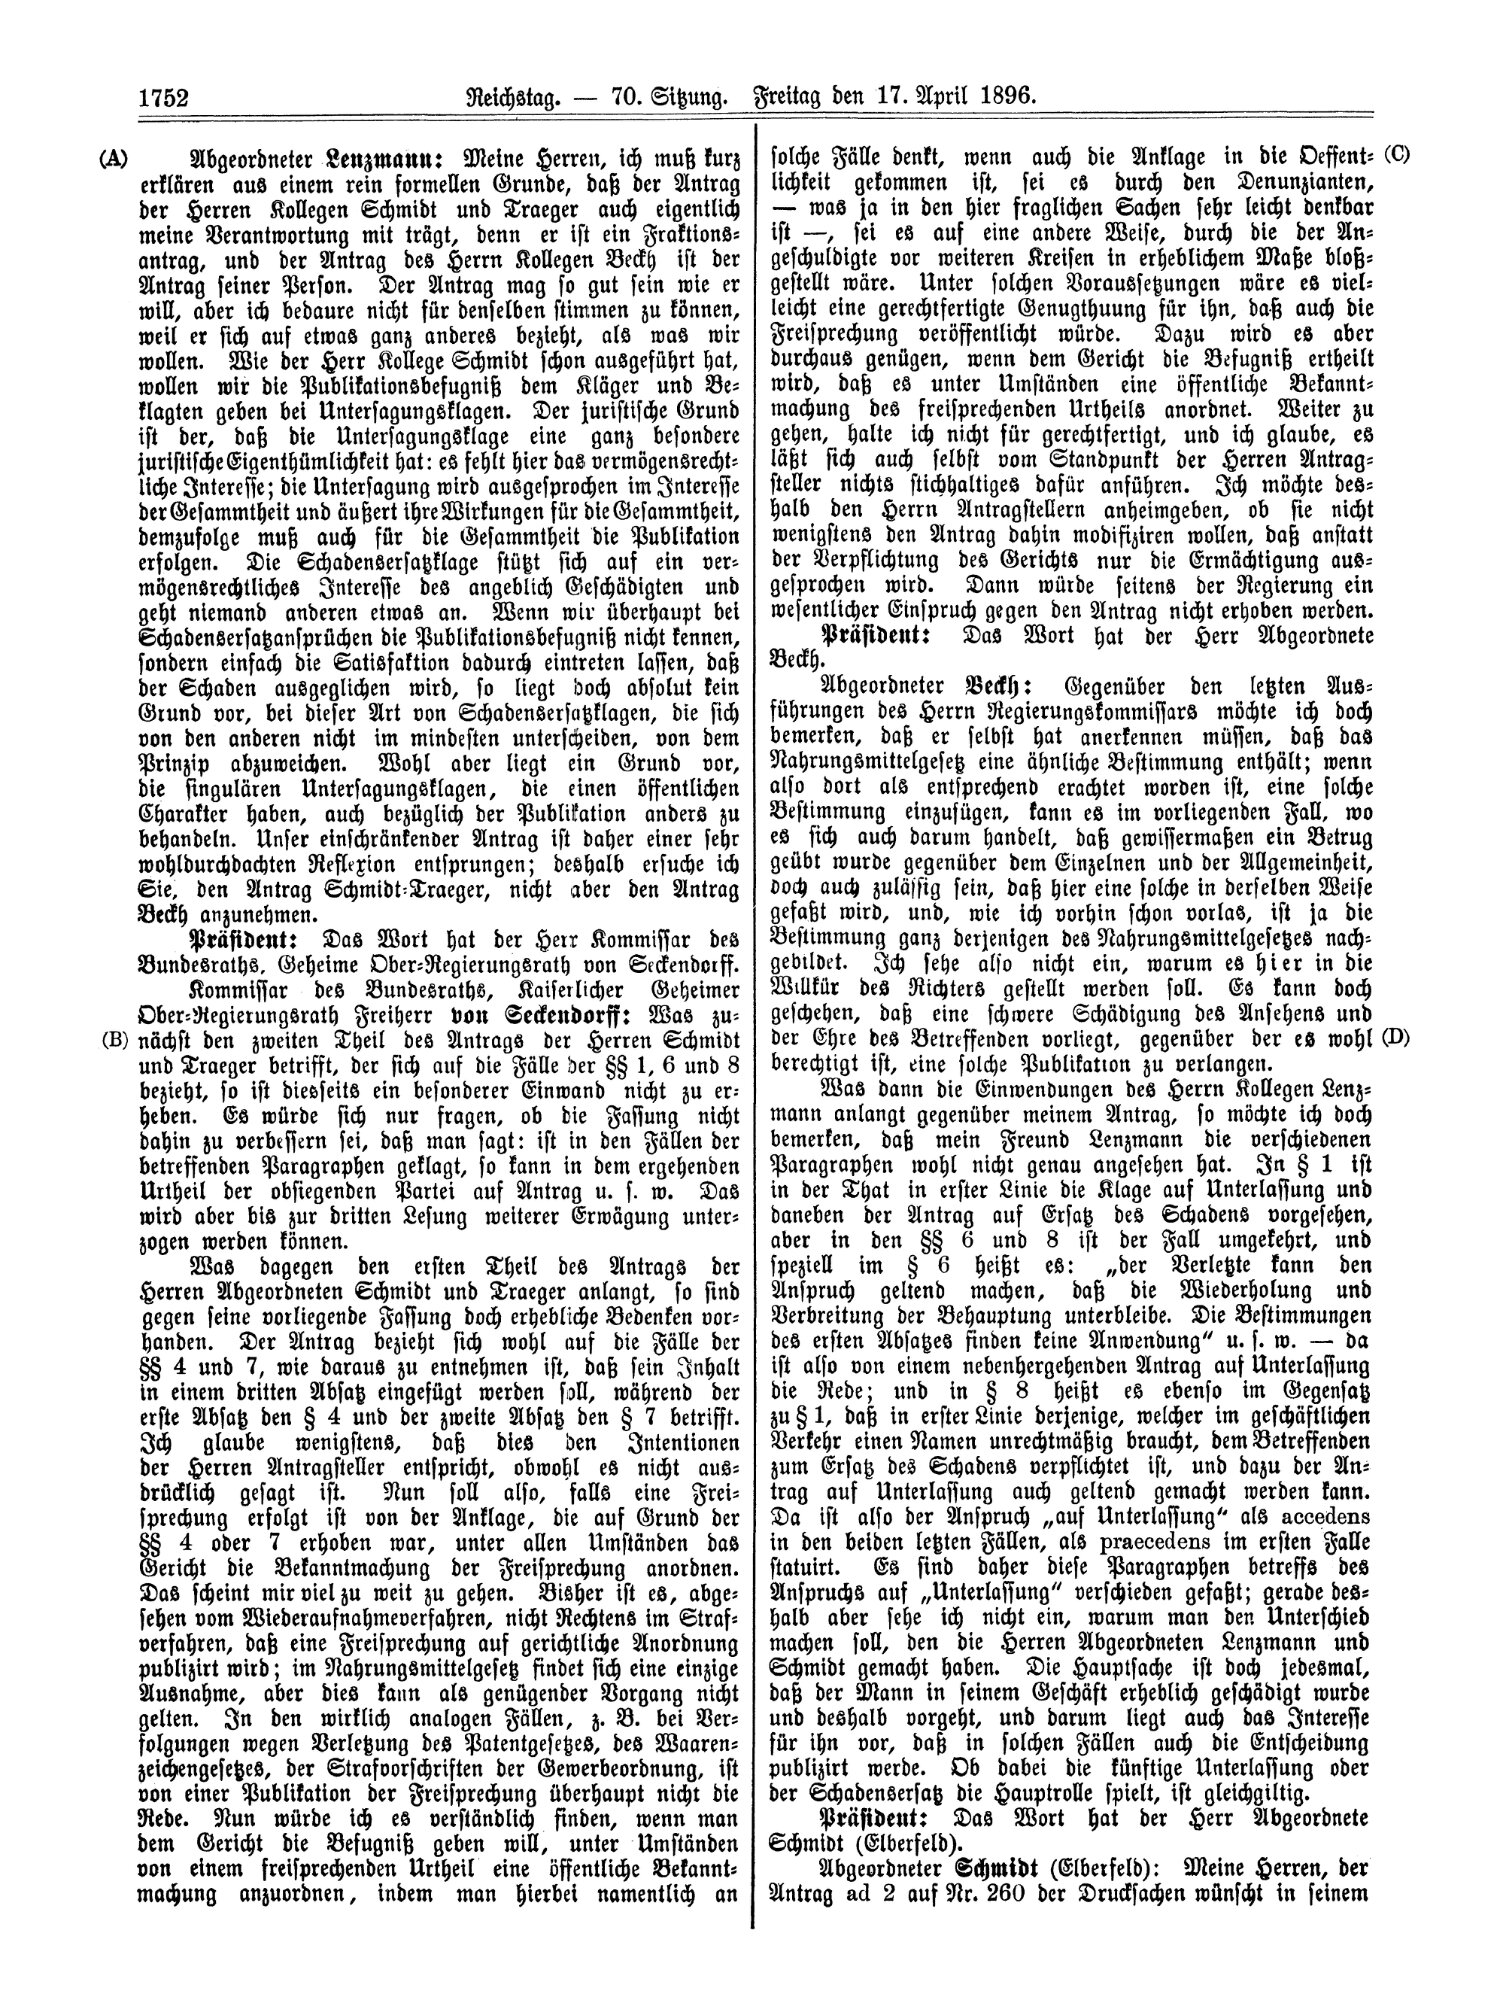 Scan of page 1752